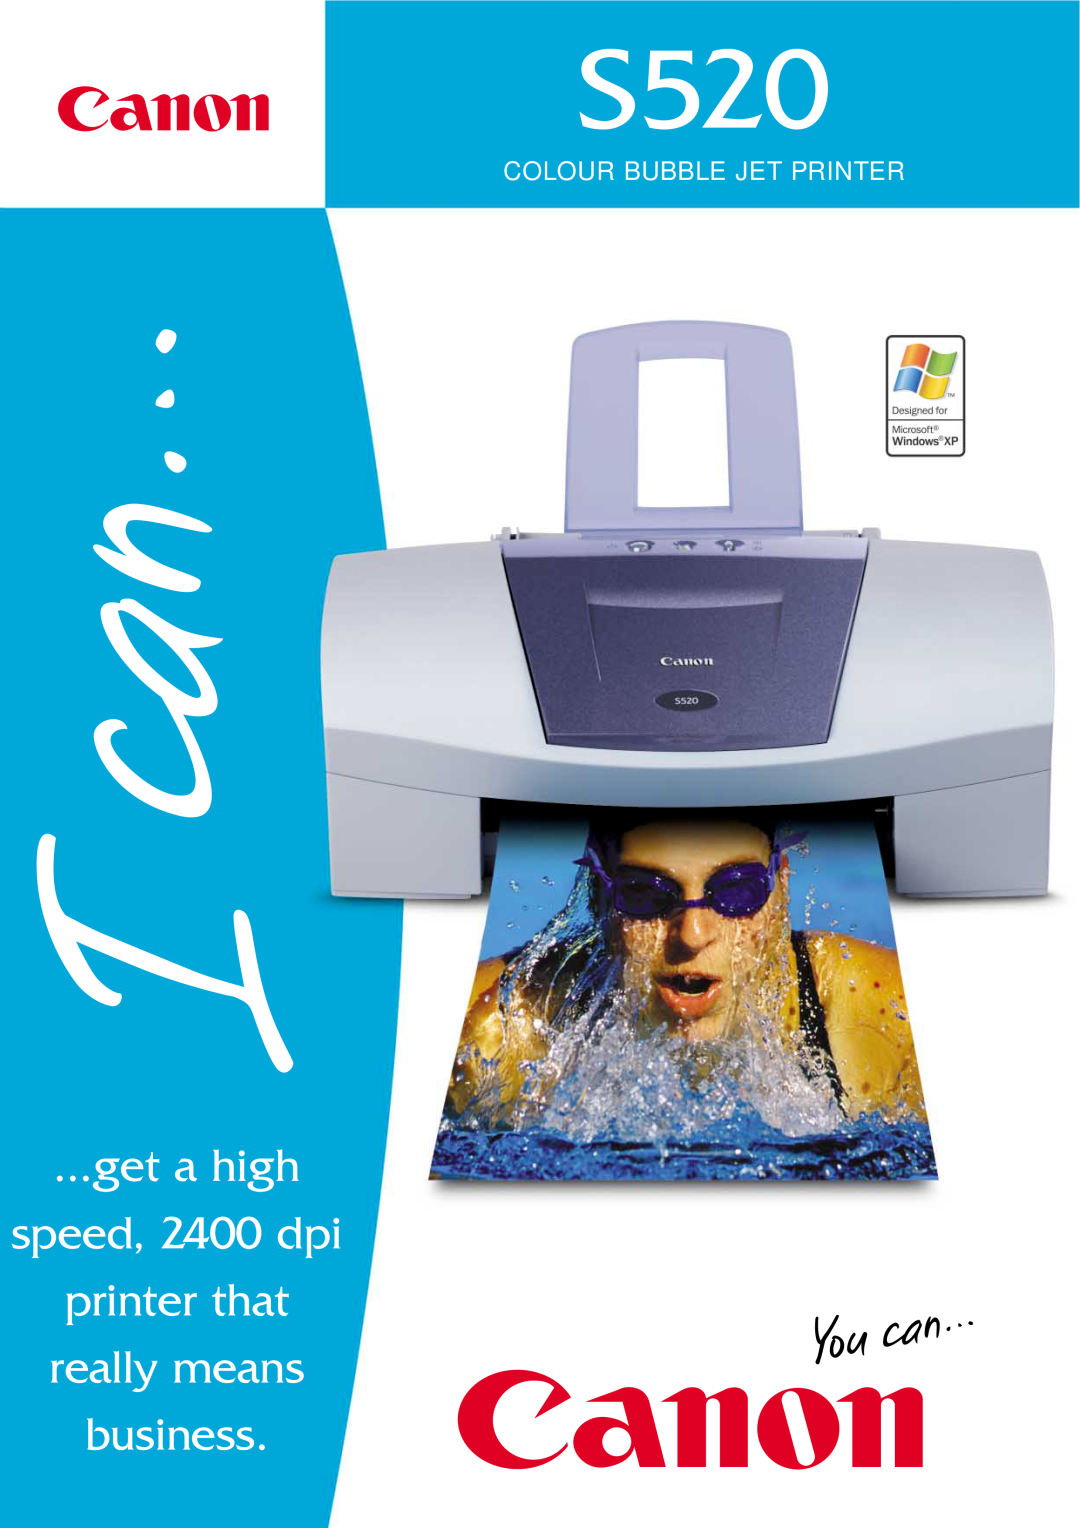 Canon manual S520, get a high speed, 2400 dpi printer that really means business, Colour Bubble Jet Printer 